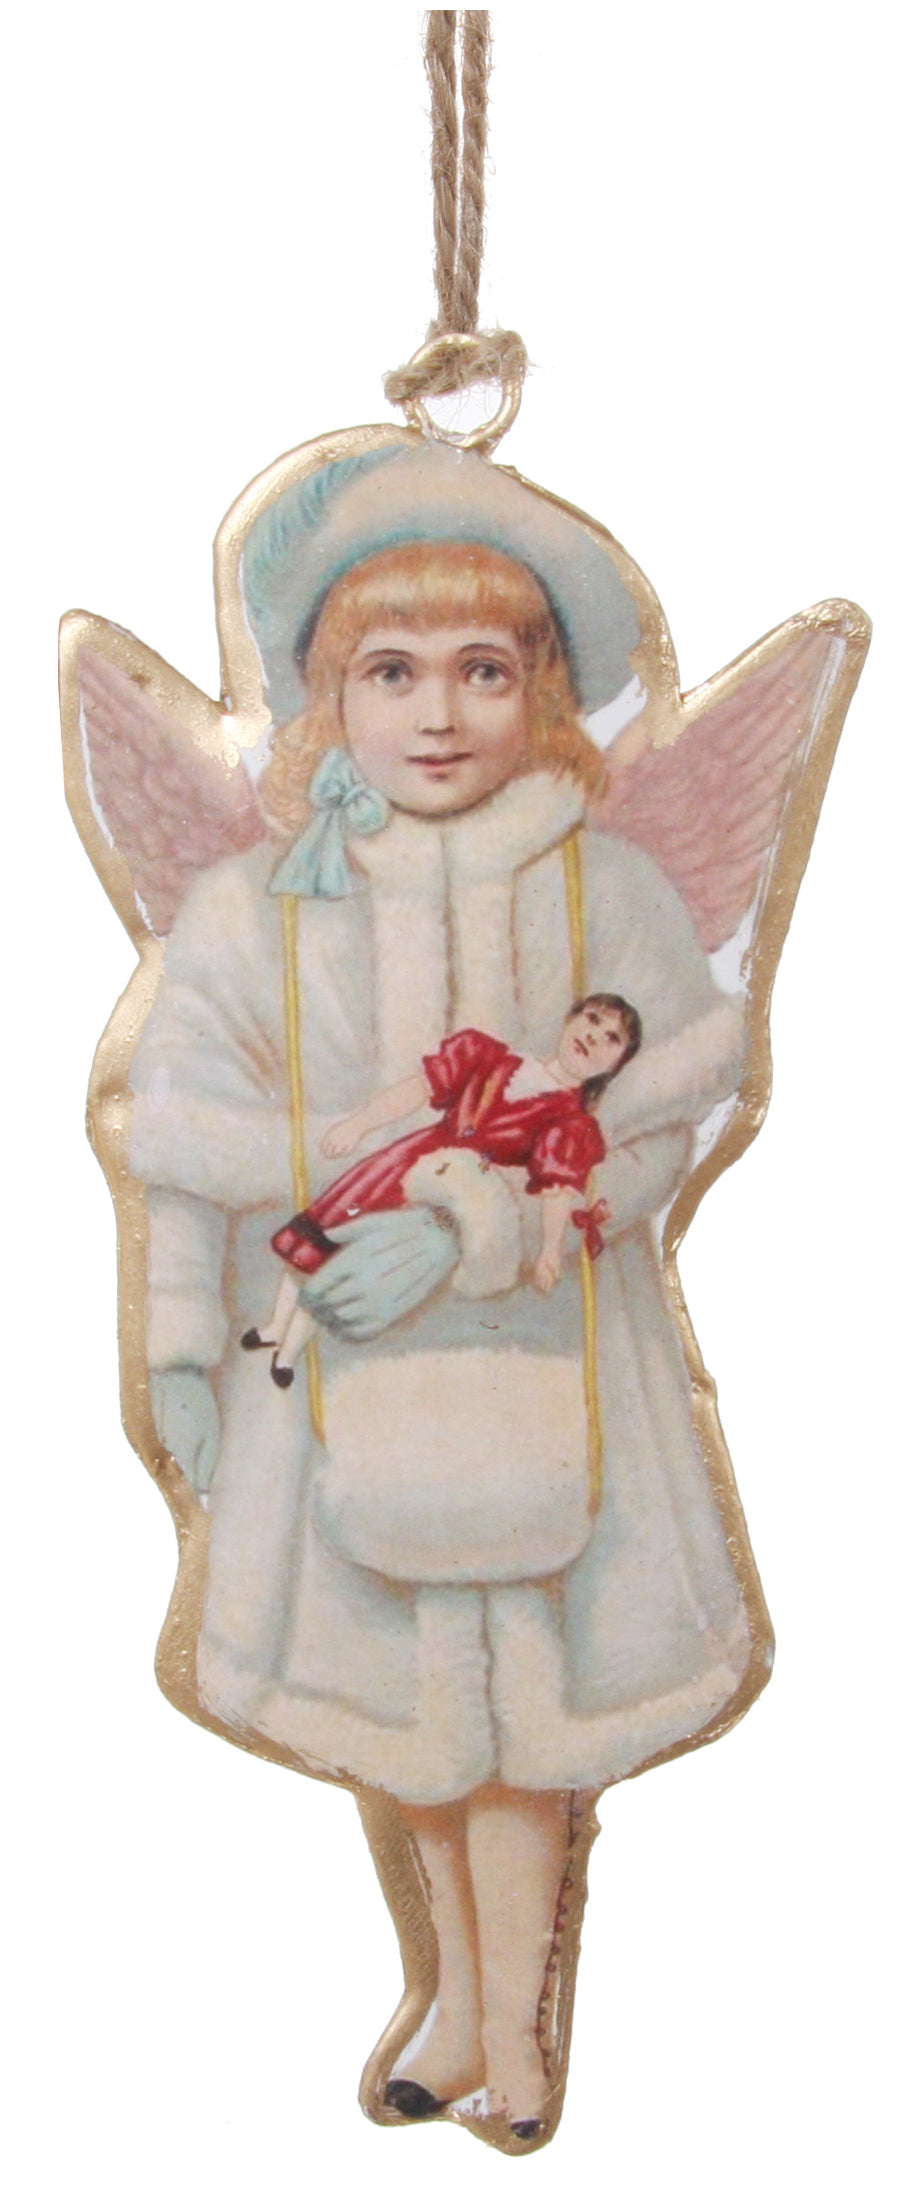 Victorian Girl Christmas Angel Ornament, Angel in Fur Coat and Muff Holding a Doll